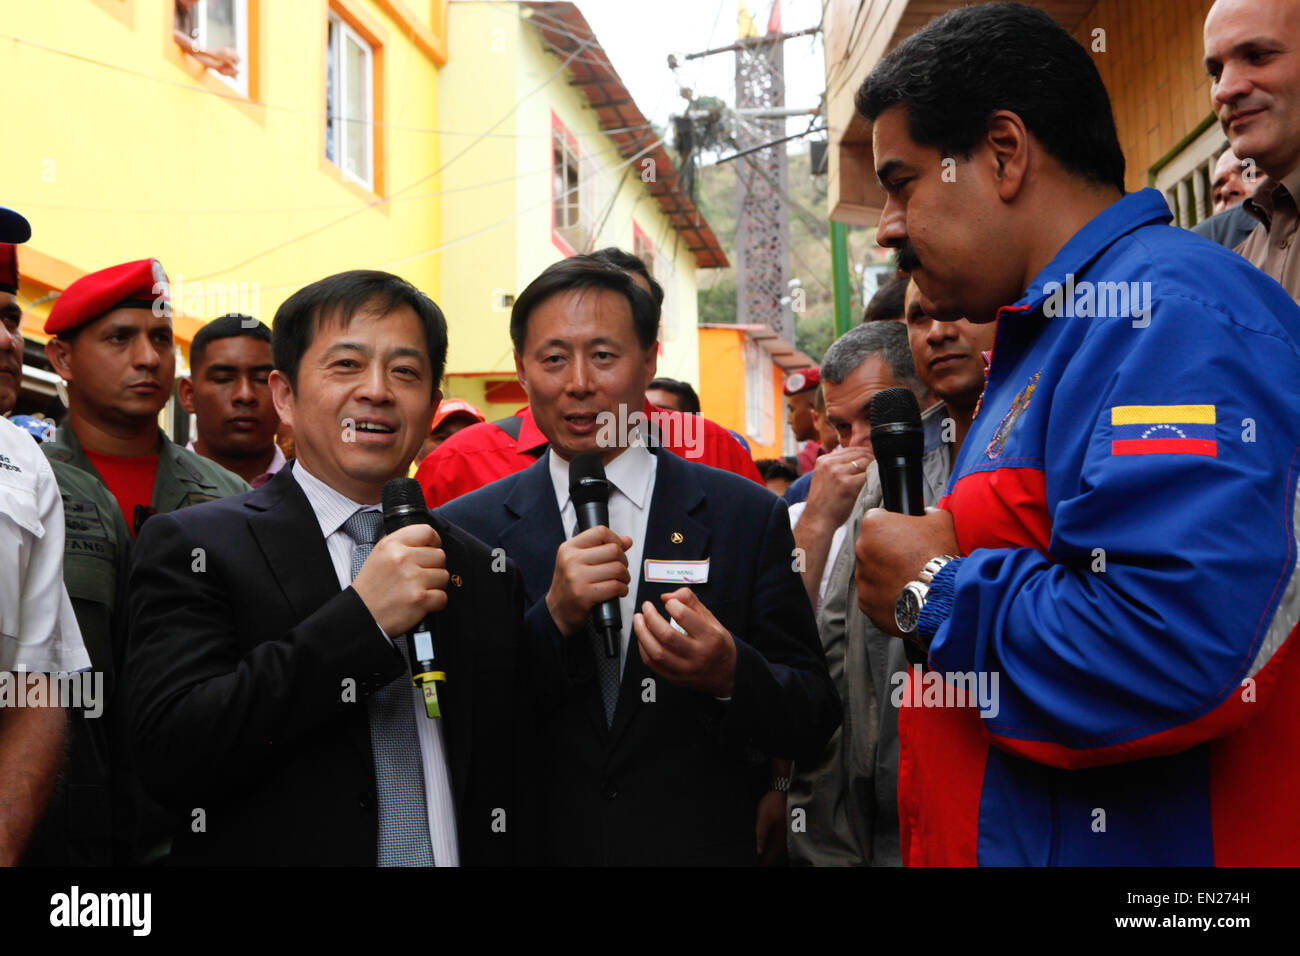 Caracas, Venezuela. 25th Apr, 2015. Image provided by Venezuela's Presidency shows Venezuelan President Nicolas Maduro (R) and the regional manager in Latin America of Chinese company Sany Heavy Industry Co. Ltd, Xu Ming (C), taking part in a tour in a slum in Caracas, Venezuela, on April 25, 2015. Venezuelan President Nicolas Maduro said Saturday the government will work with Chinese companies to build new housing units as part of an ambitious plan to provide homes for those without proper or adequate dwelling in the country. © Venezuela's Presidency/Xinhua/Alamy Live News Stock Photo